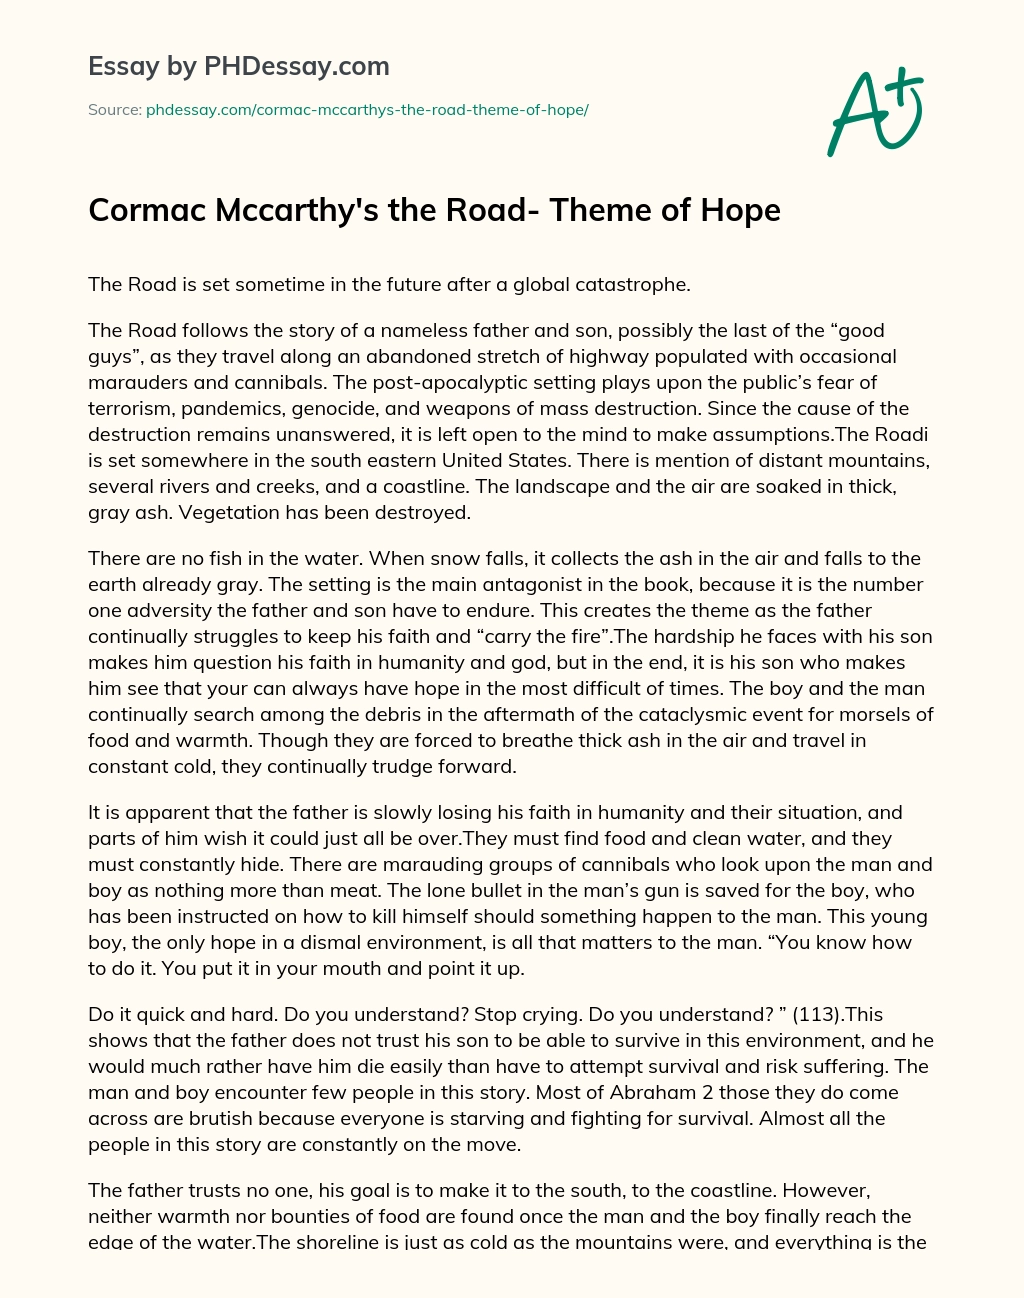 Cormac Mccarthy’s the Road- Theme of Hope essay